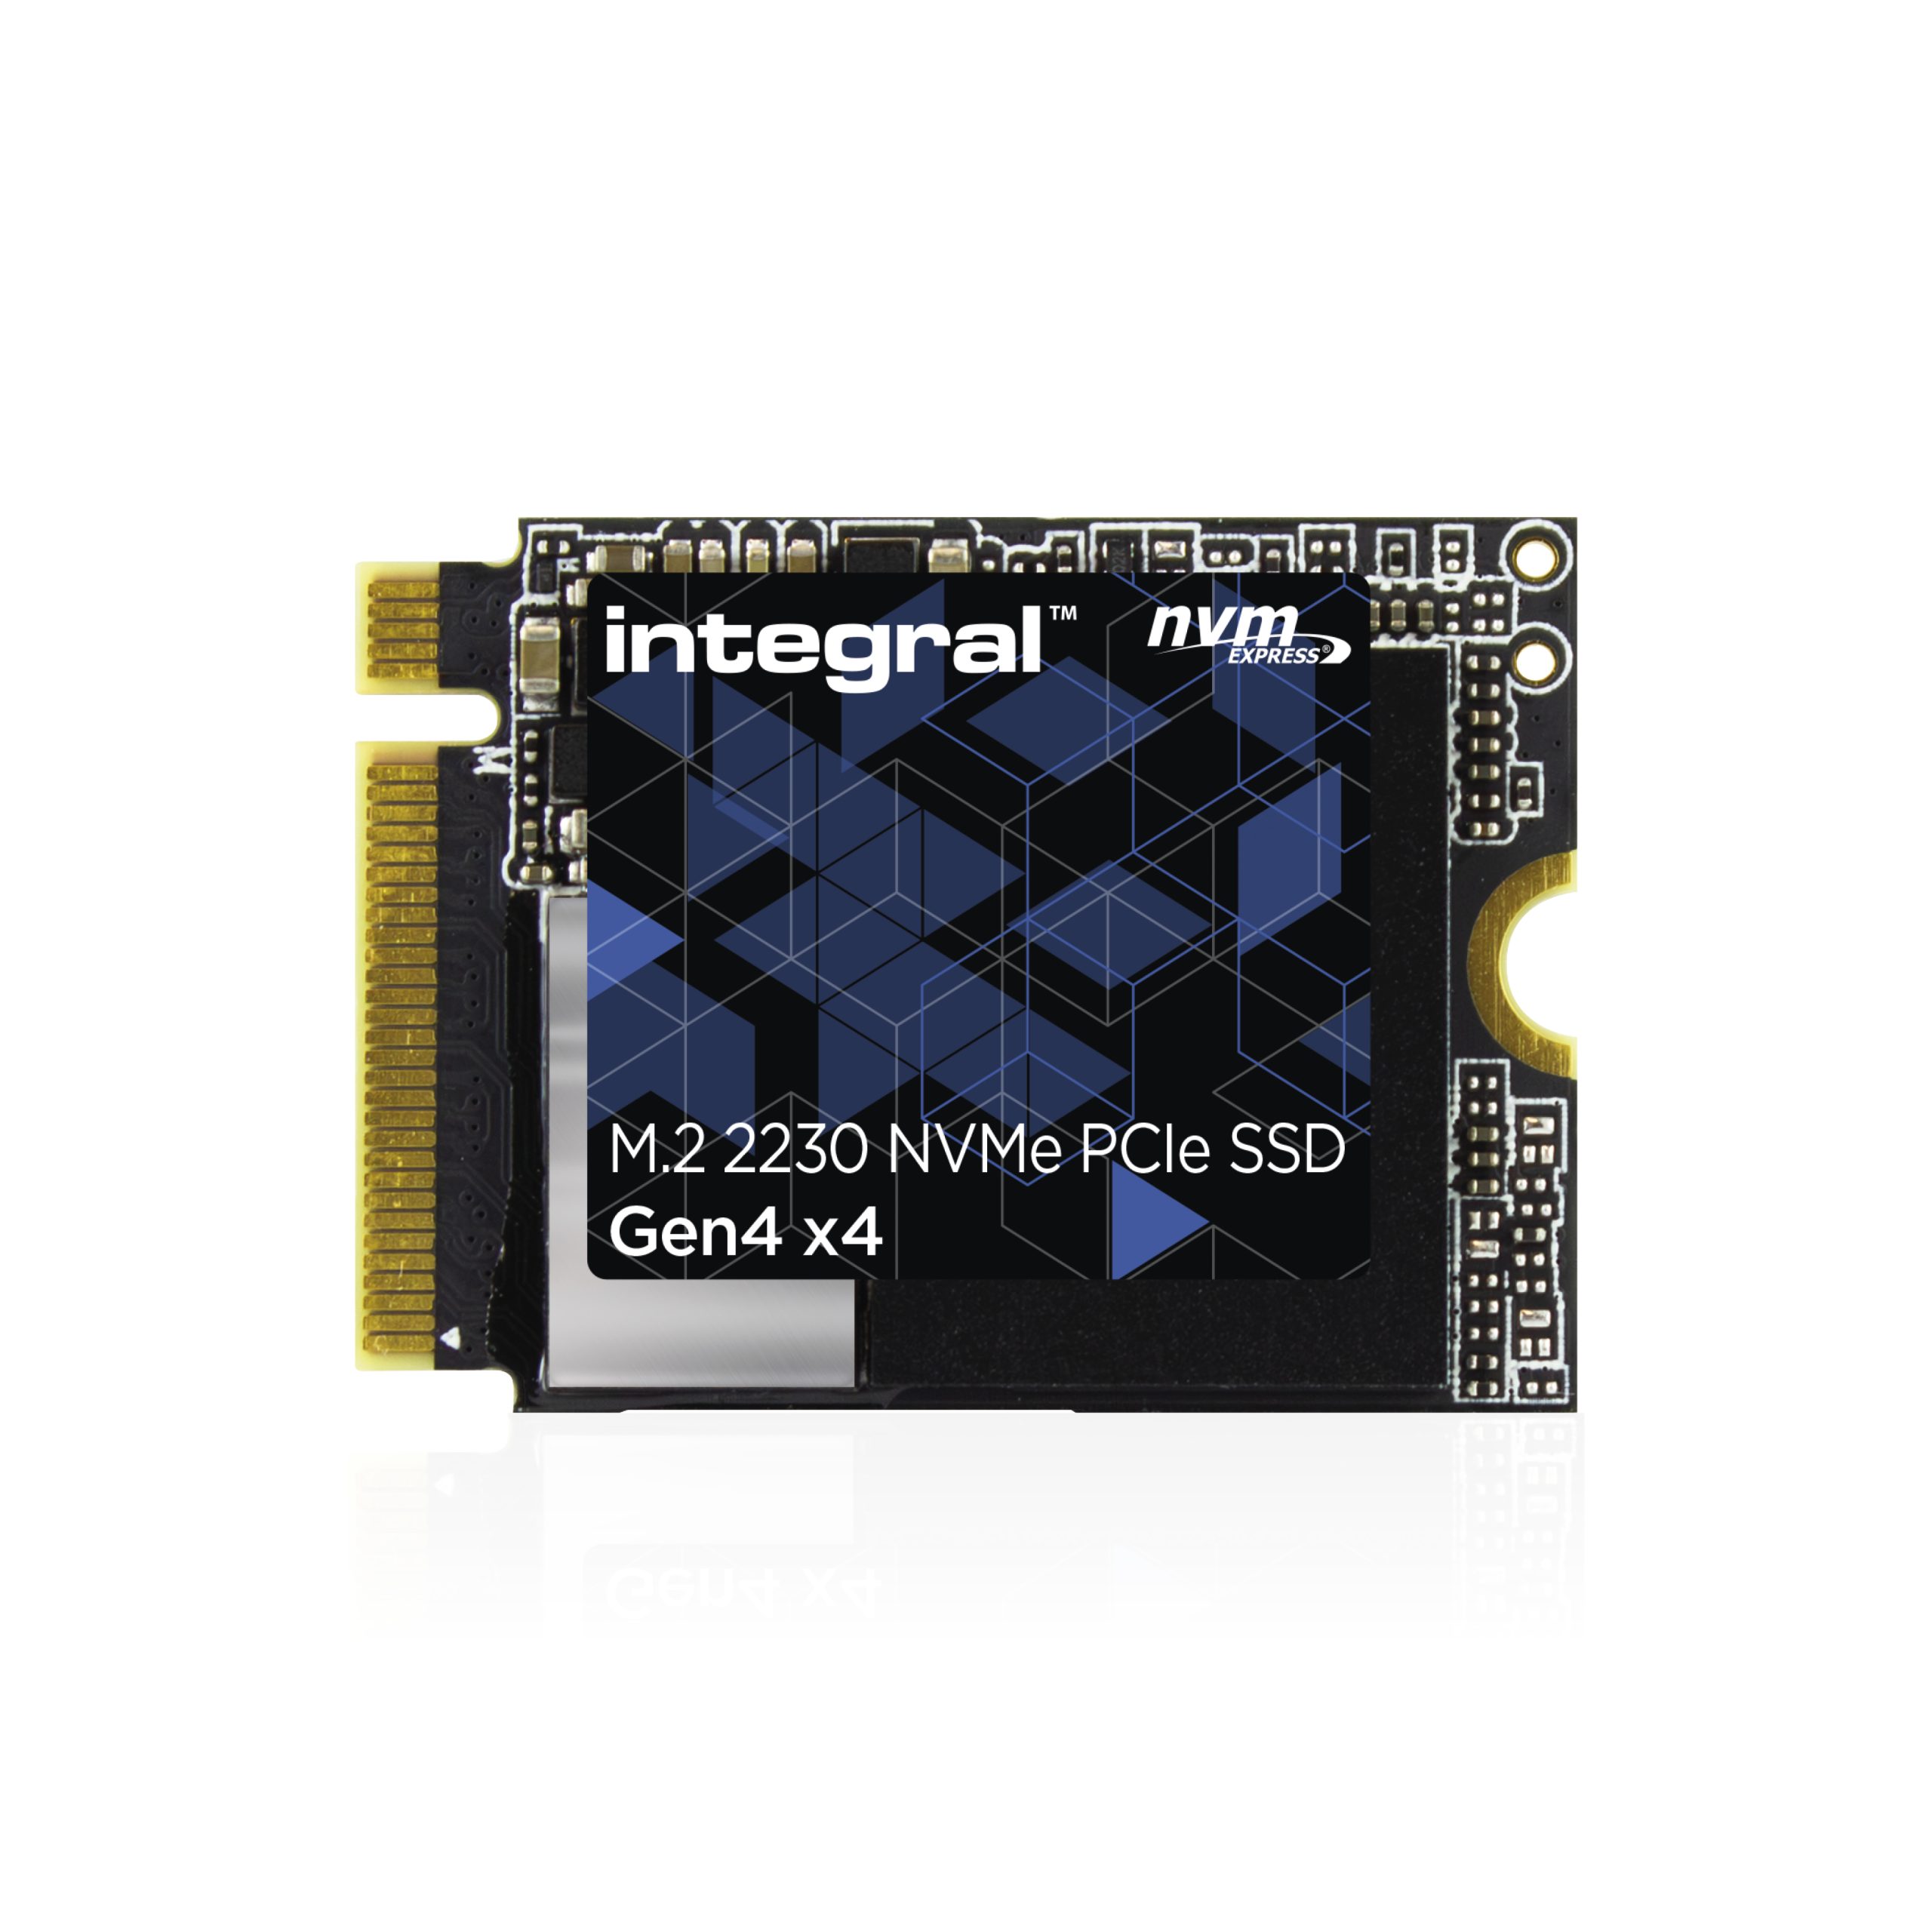 M.2 2230 NVMe SSD Gen4 Solid State Drive